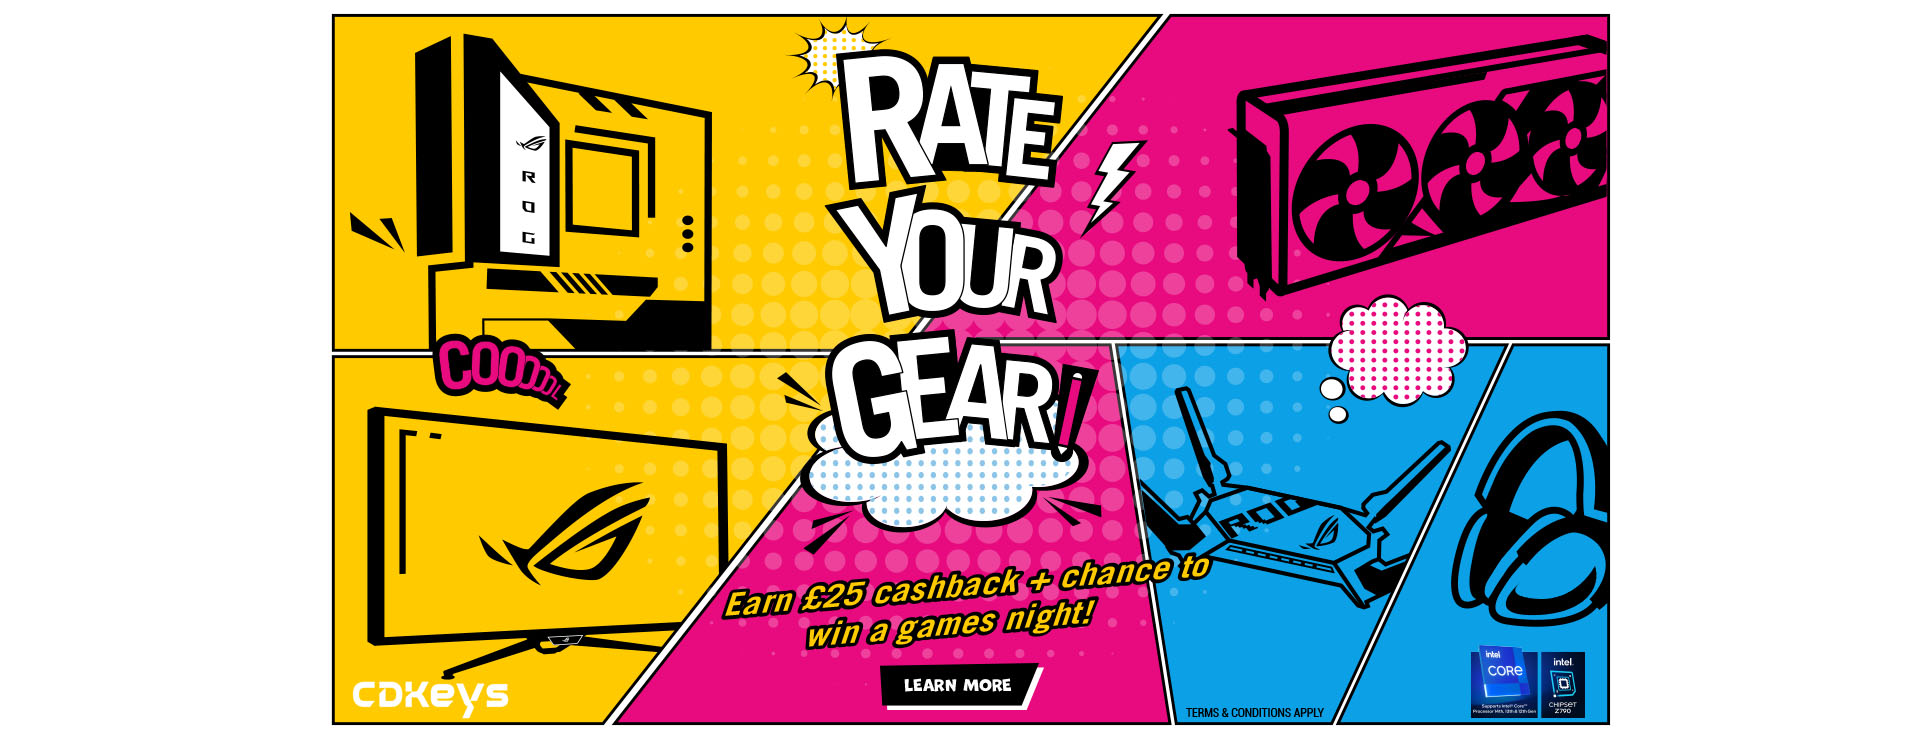 Republic of Gamers - Rate Your Gear